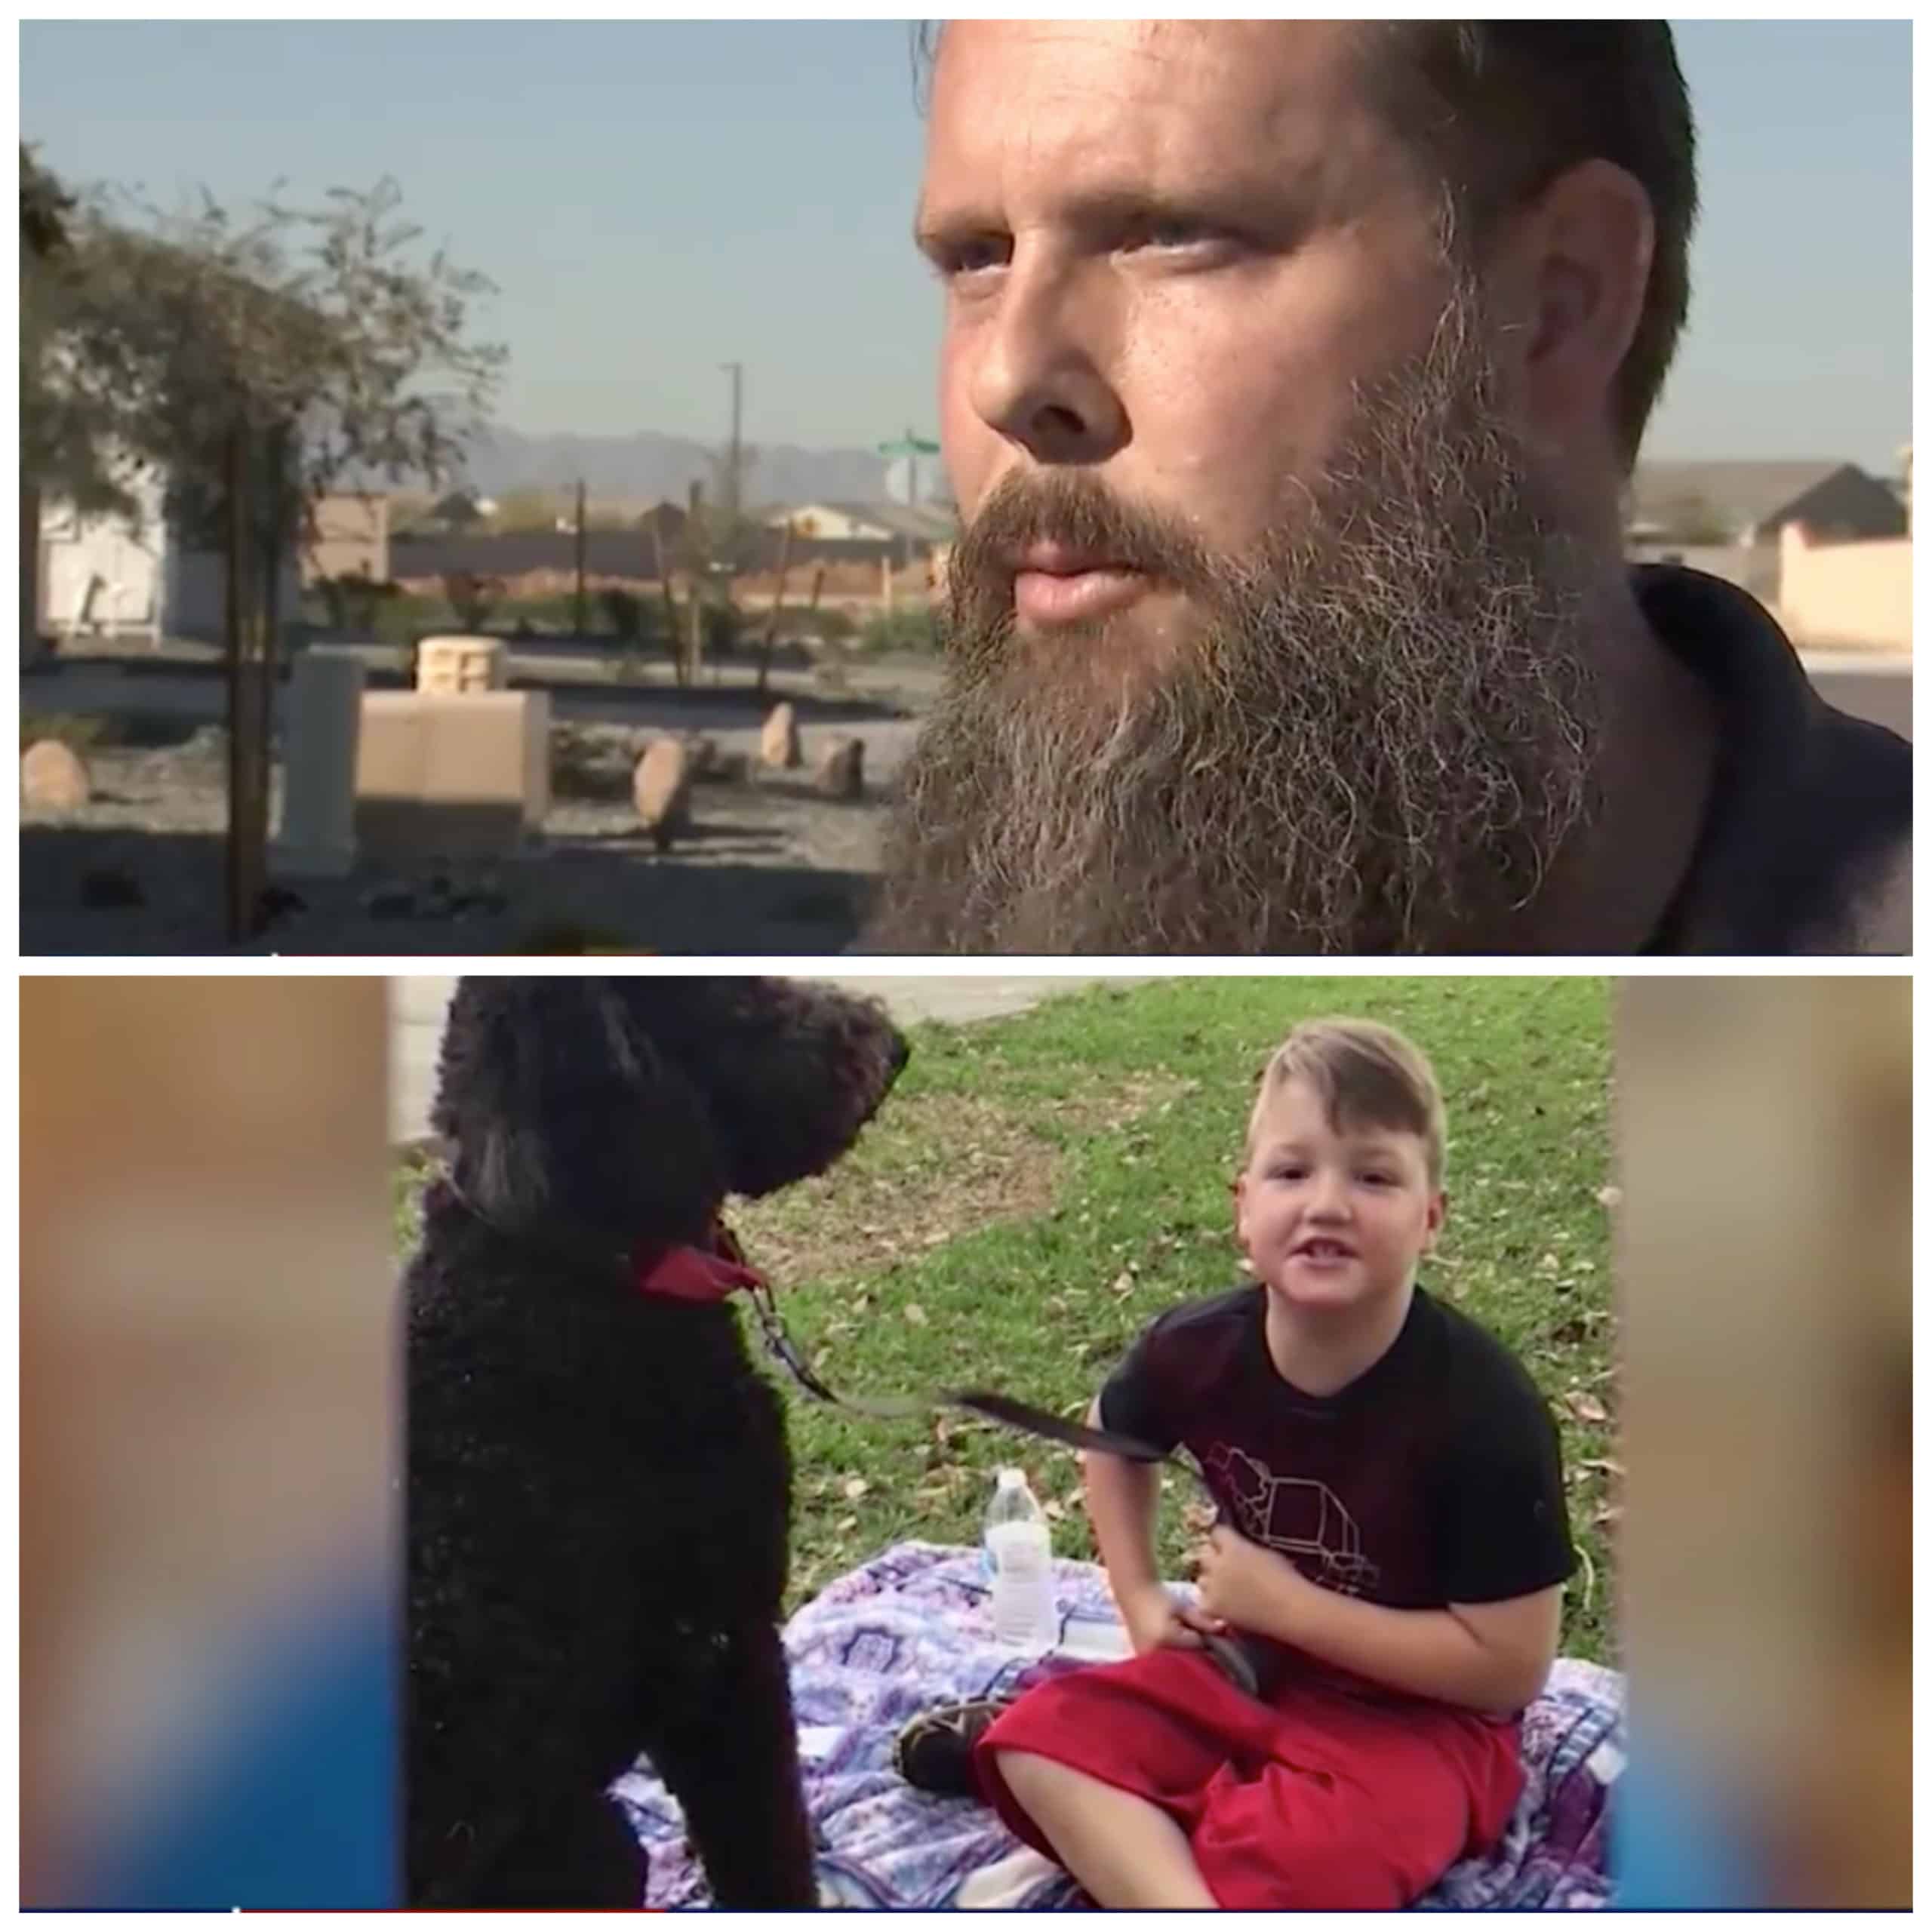 The Service Dog Trainer: They Gave Up Their Son's Service Dog Just Before He Disappeared! |